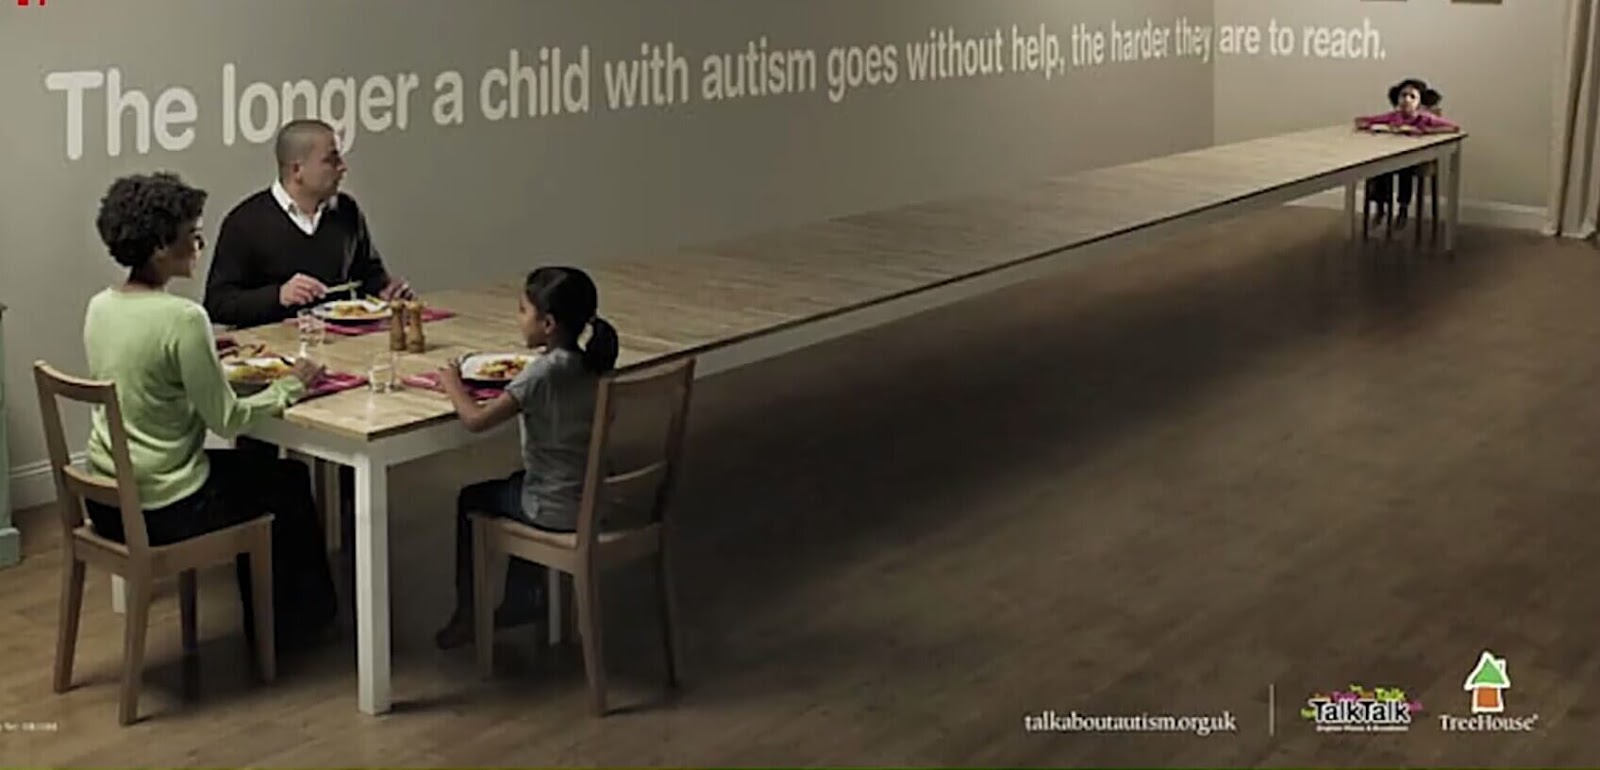 70 Brutally Honest Advertisements Raise Social Issues To Spread Thought-Provoking Messages